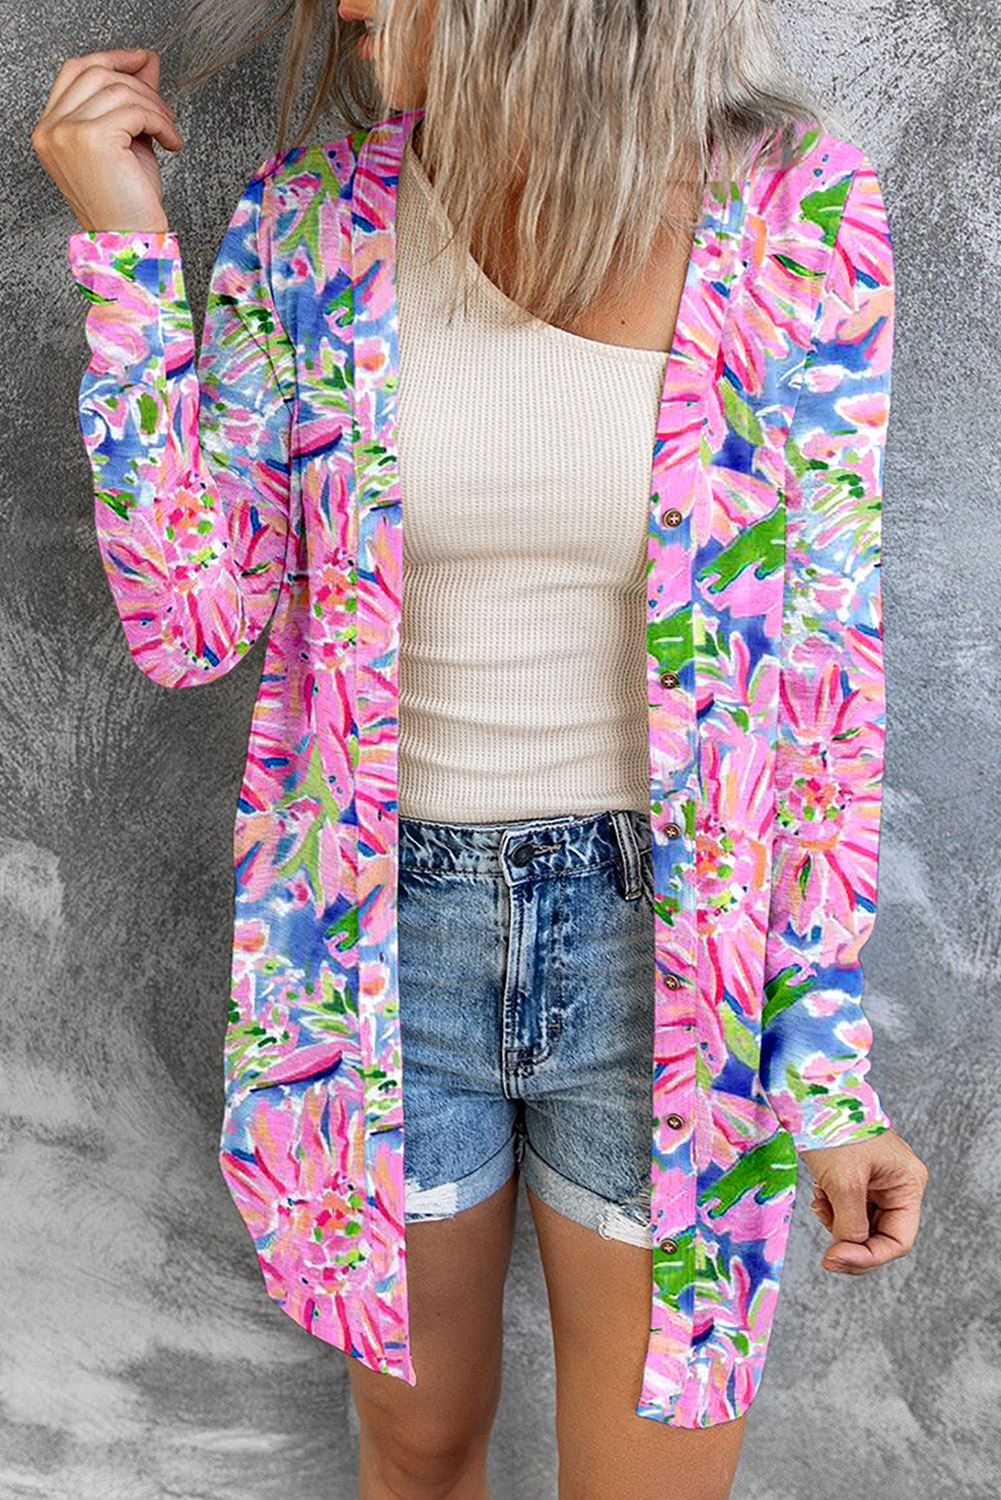 Shewin Wholesale Apparel Distributor Pink FLOWER Print Long Sleeve Button Up Cardigan